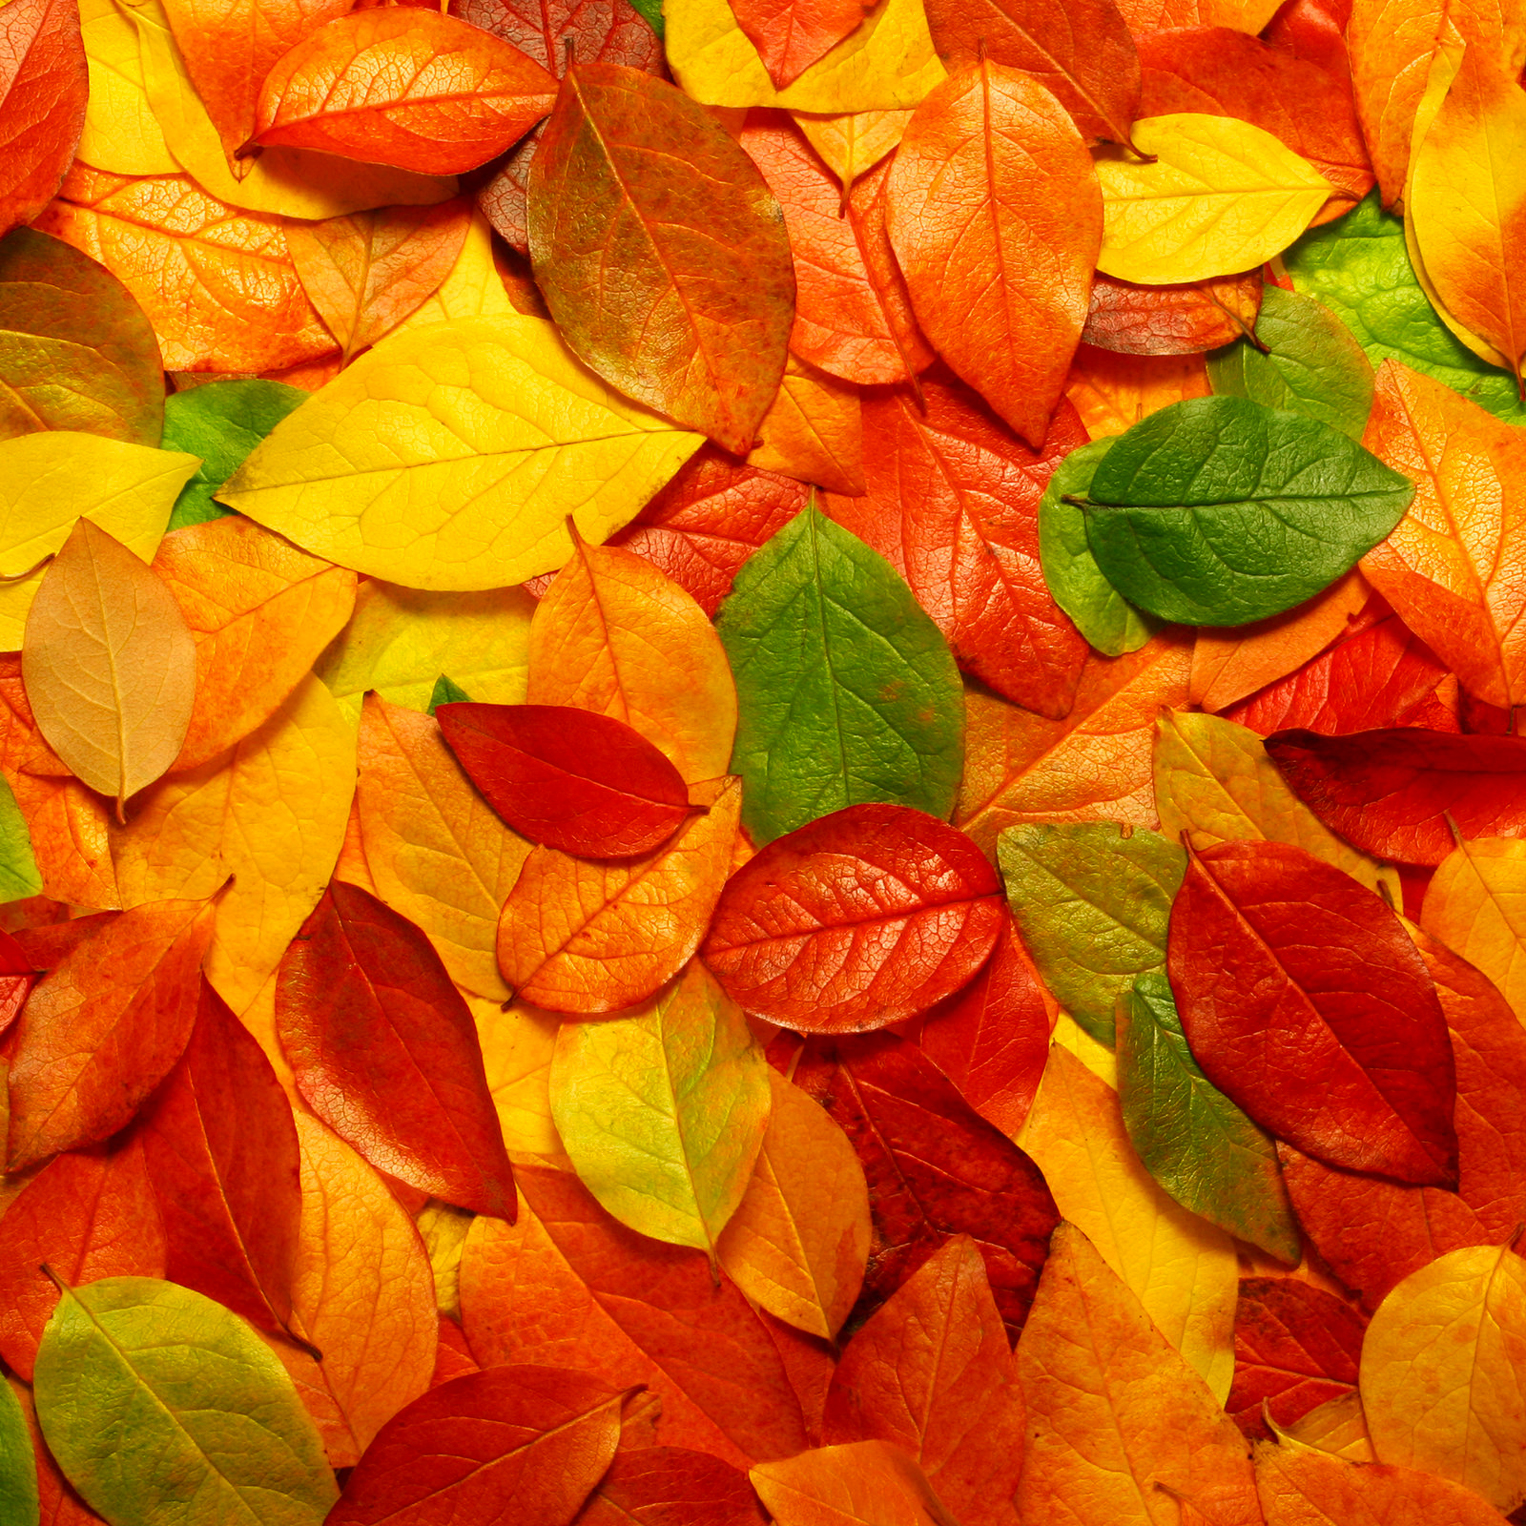 Autumn Leaves Wallpaper for iPhone Pro Max, X, 6